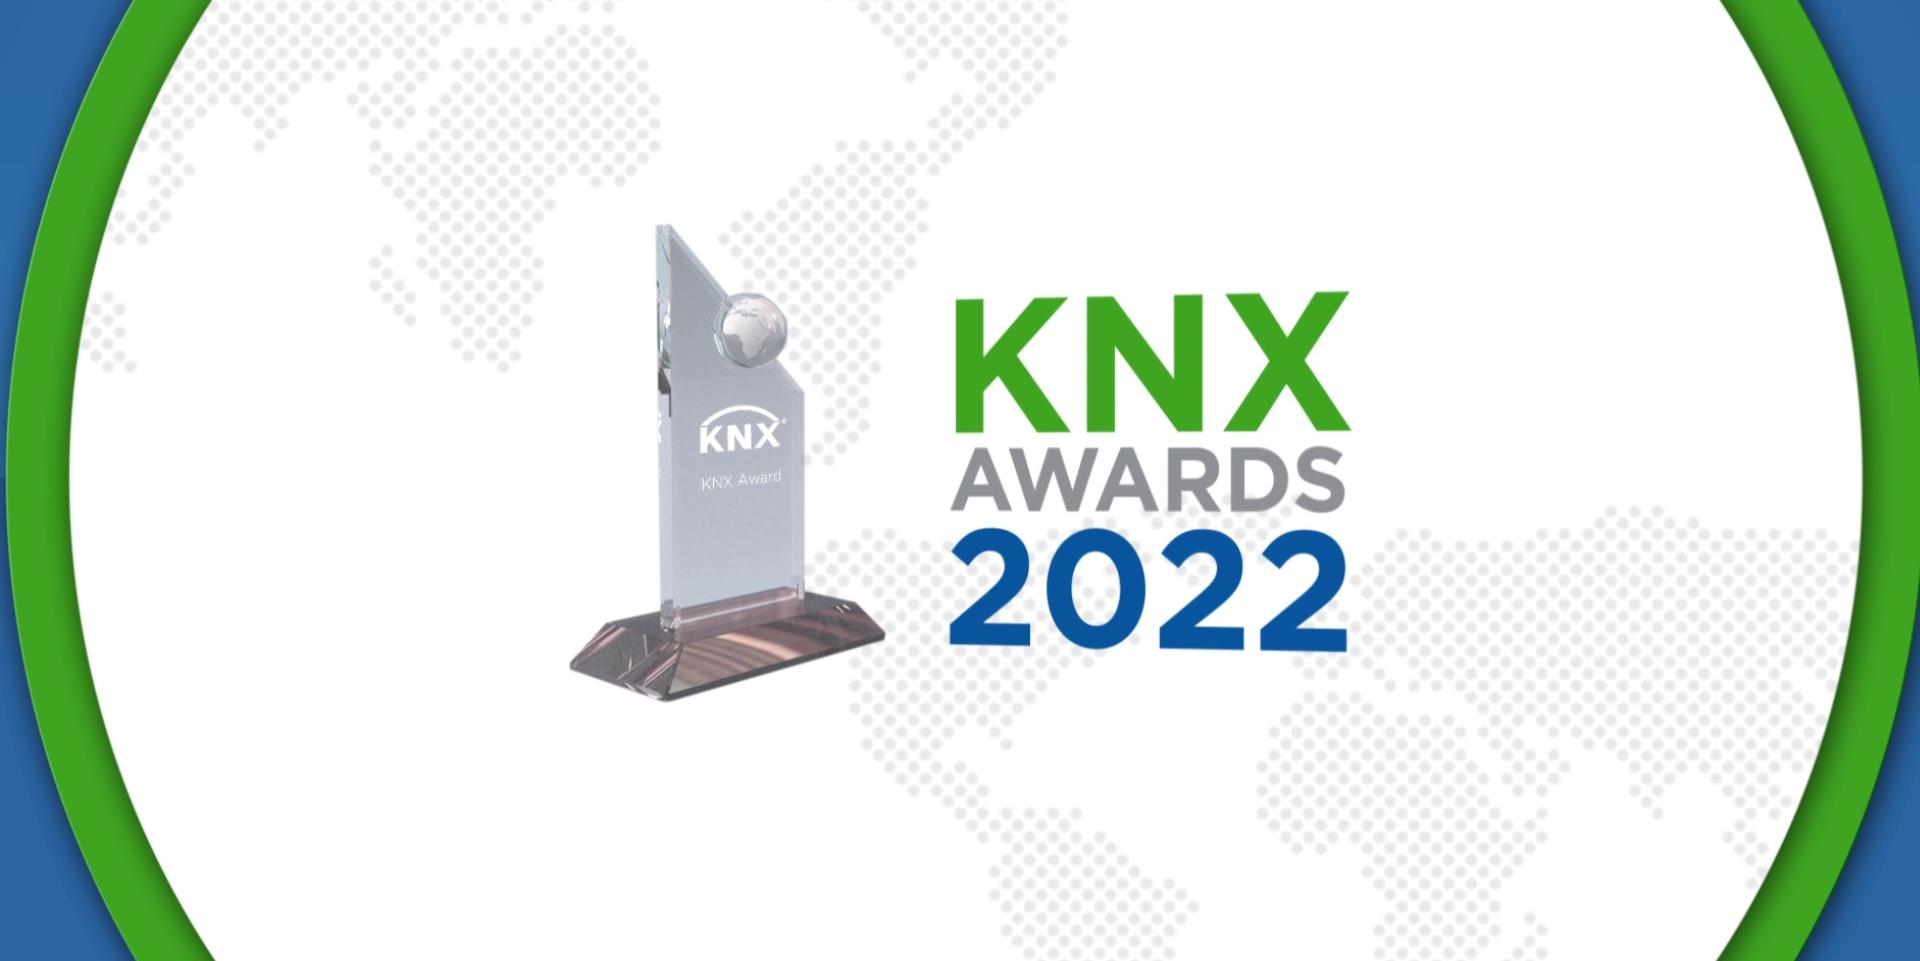 KNX Awards 2022: 14th Edition celebrates the most innovative use of KNX around the world